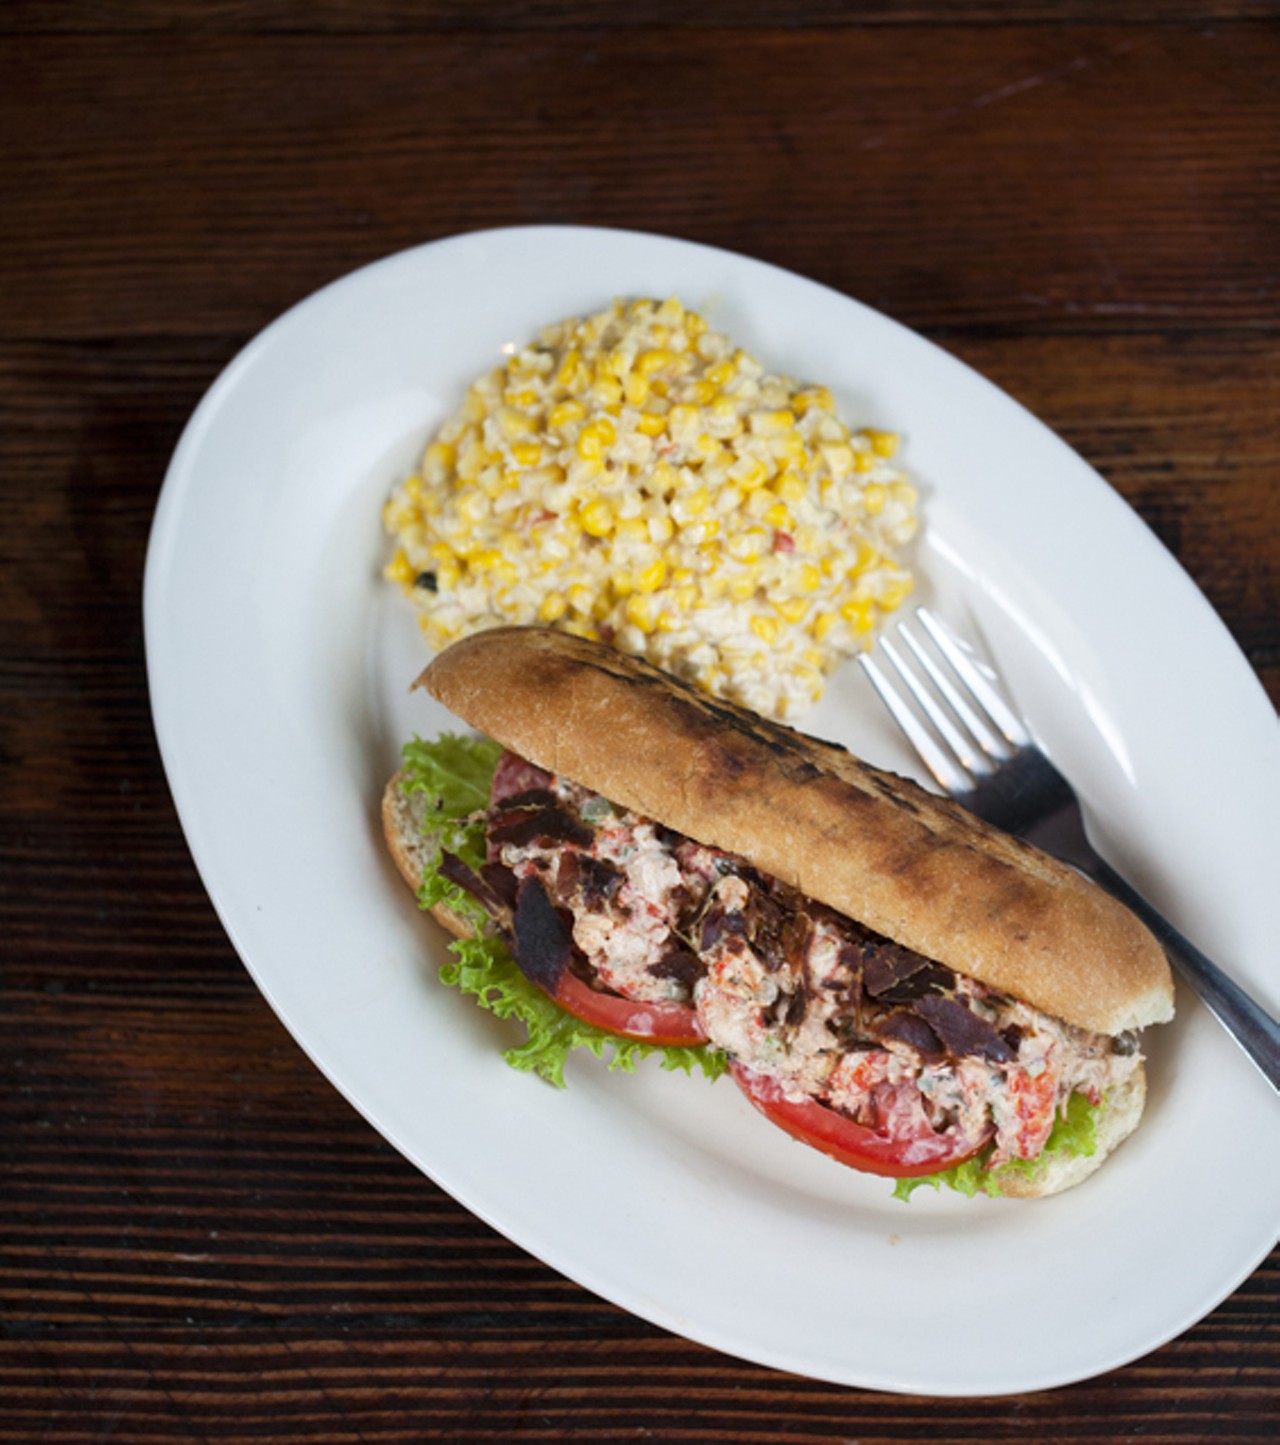 The Crawfish Salad sandwich, prepared with oven dried pancetta, tomatoes, and basil. Shown with a side of cream corn.